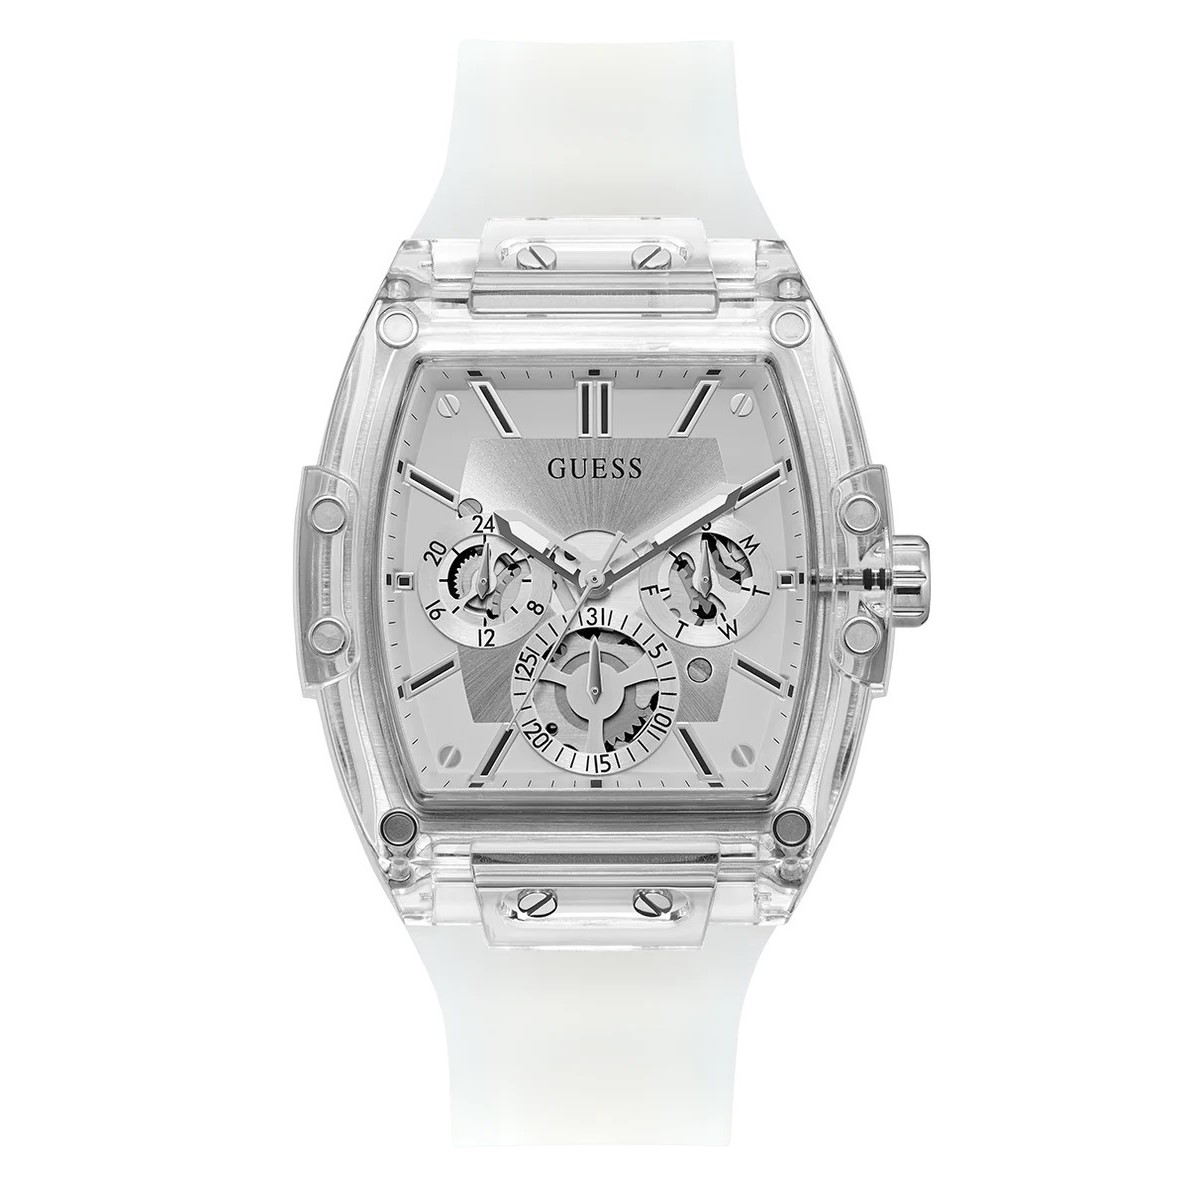 ĐỒNG HỒ ĐEO TAY NAM GUESS MENS CLEAR MULTI-FUNCTION WATCH GW0203G1 2